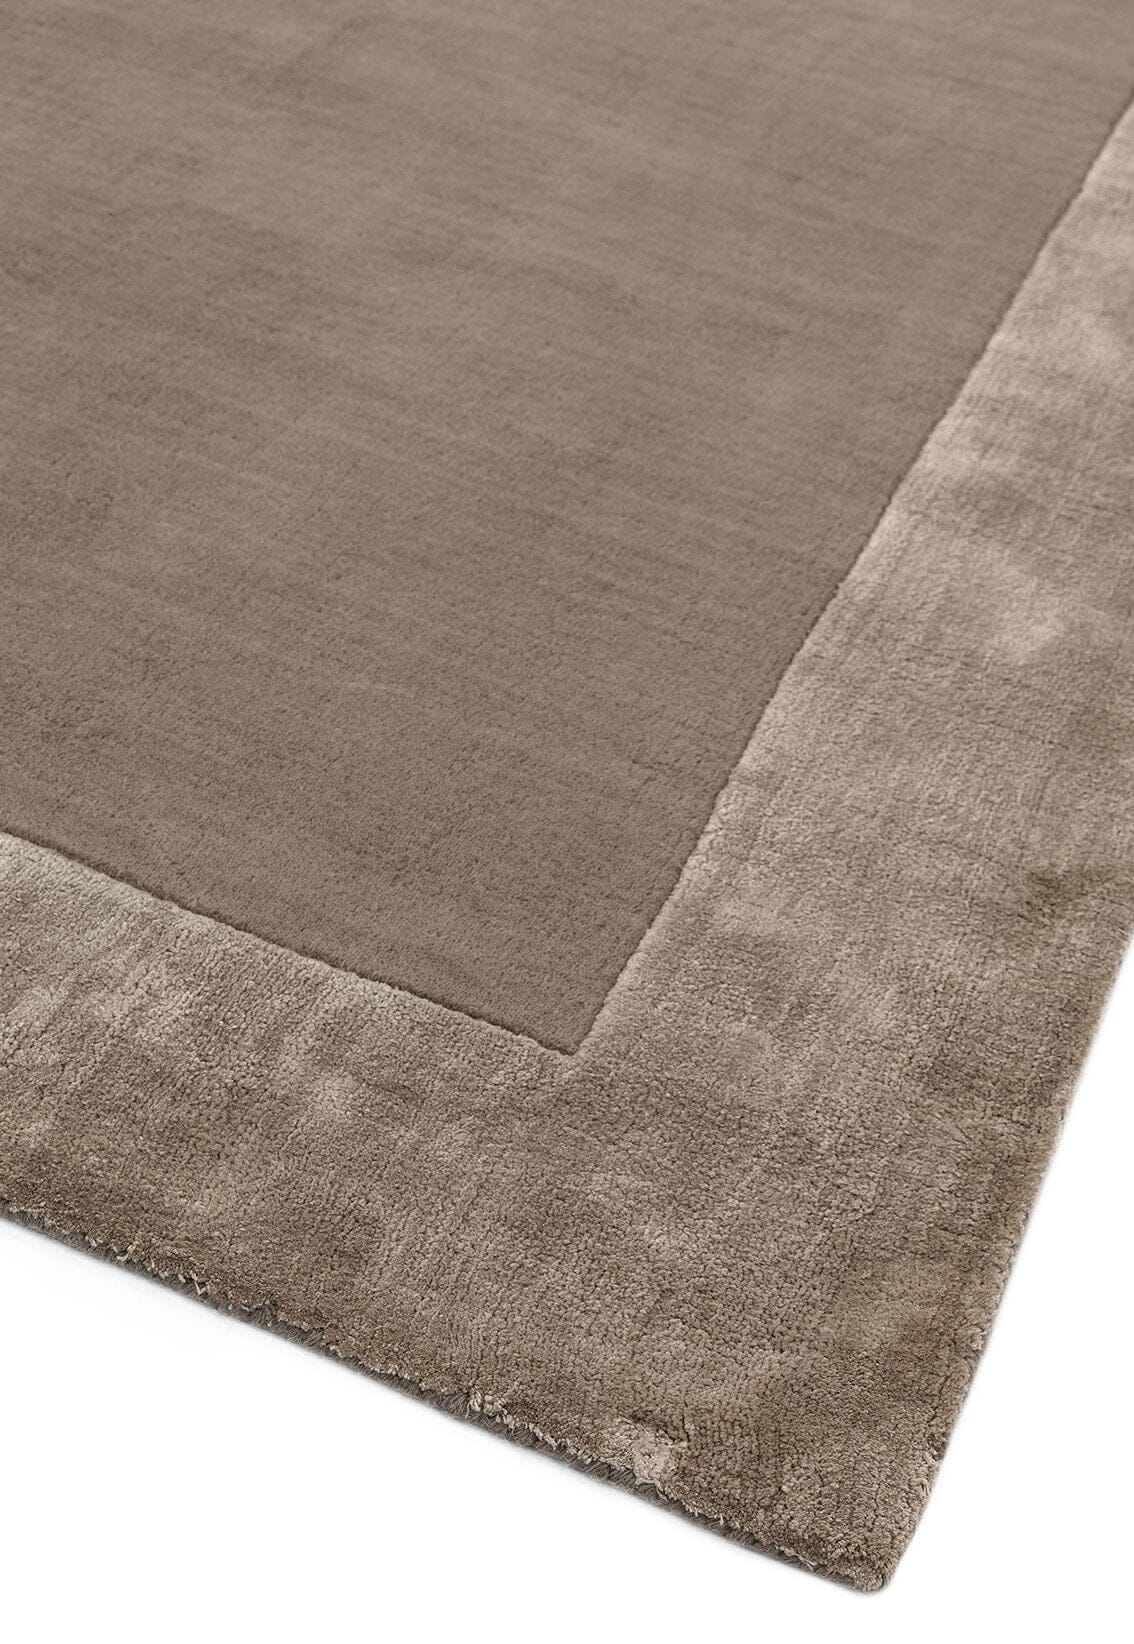  Asiatic Carpets-Asiatic Carpets Ascot Hand Woven Rug Taupe - 200 x 290cm-Beige, Natural 845 